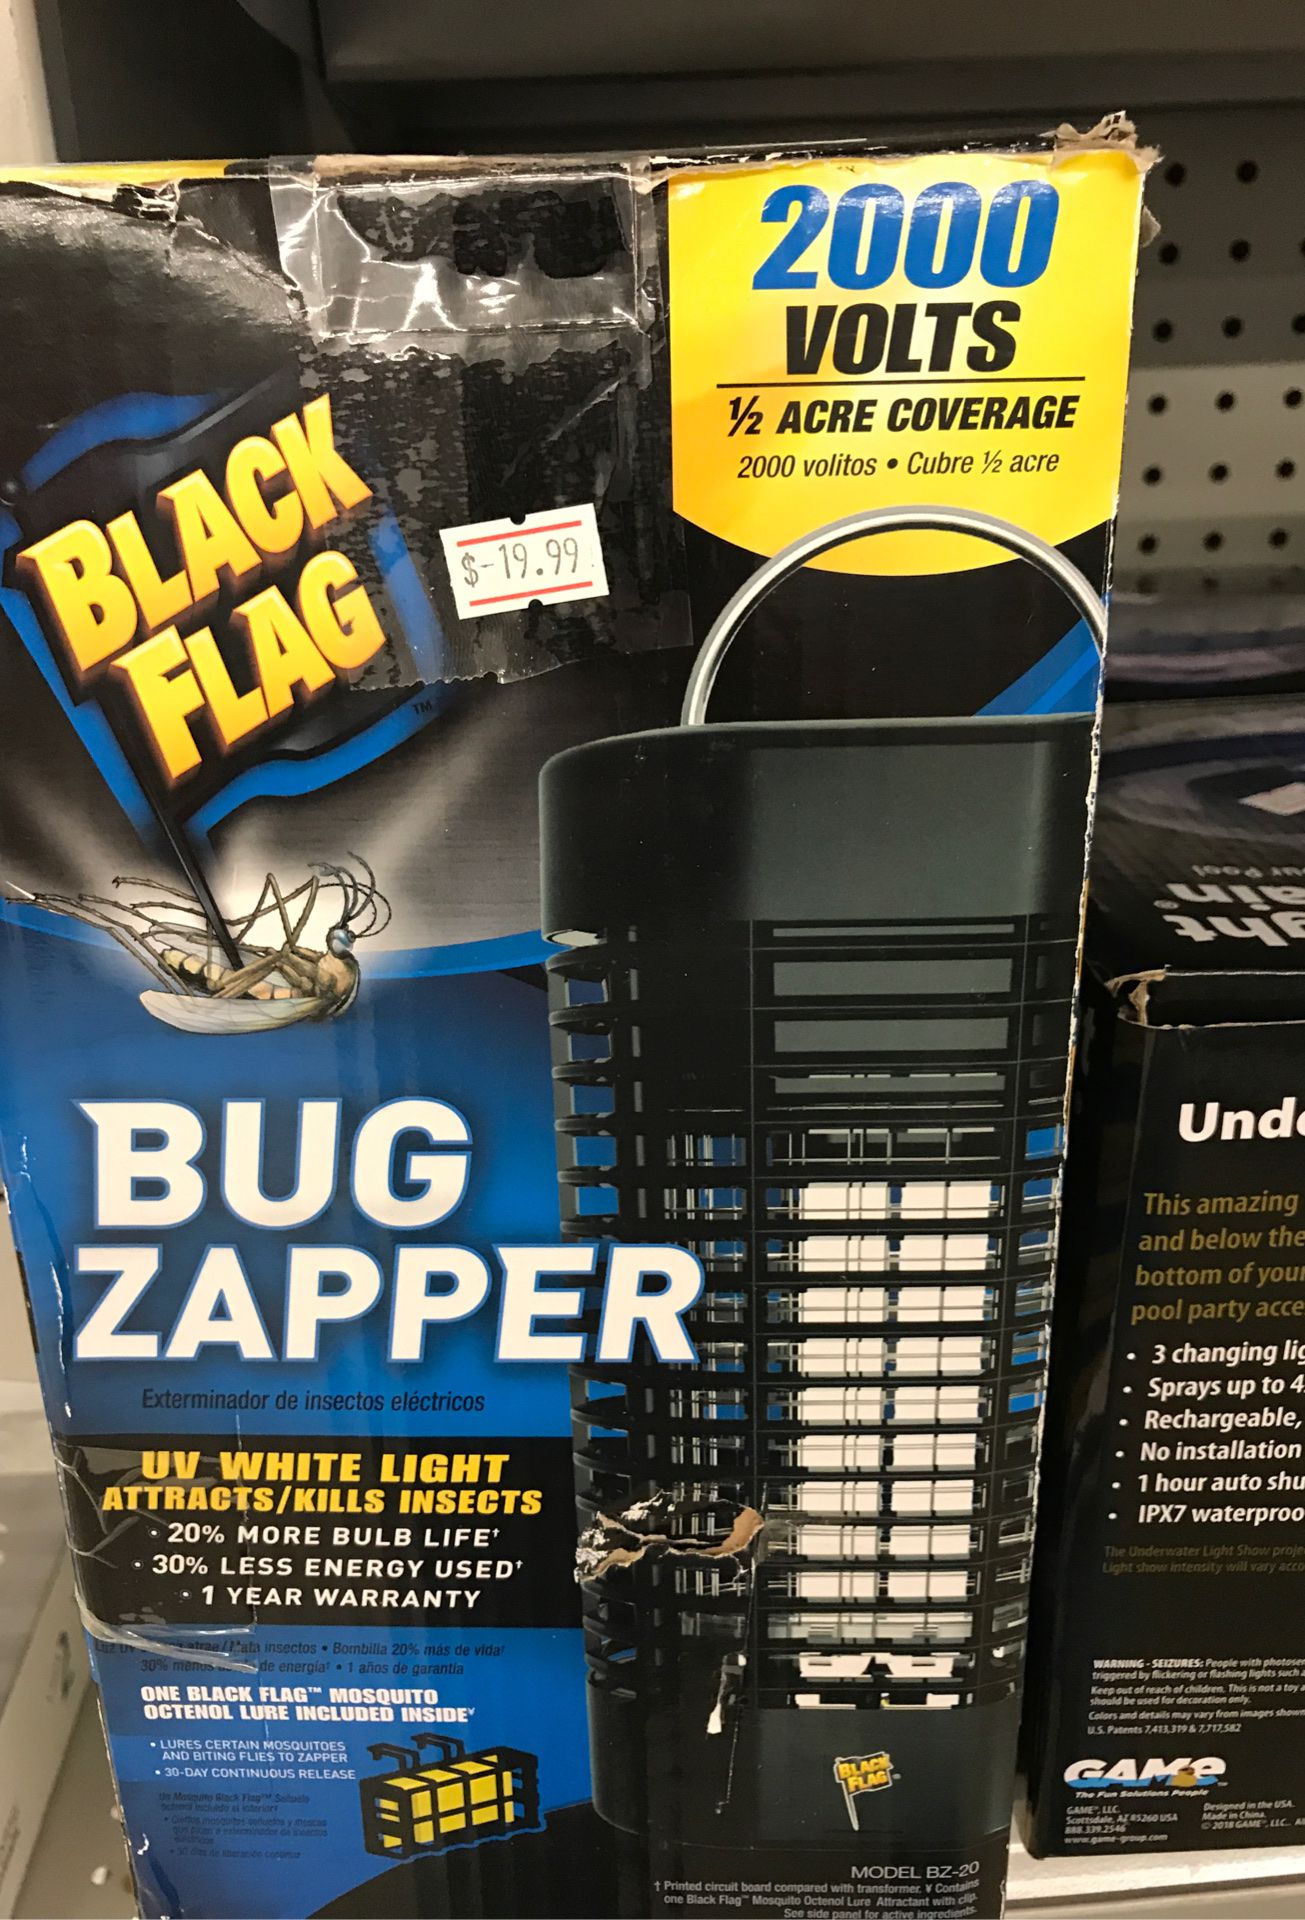 Bug zapper 2000 bolts covers up to have a car coverage made by black flag